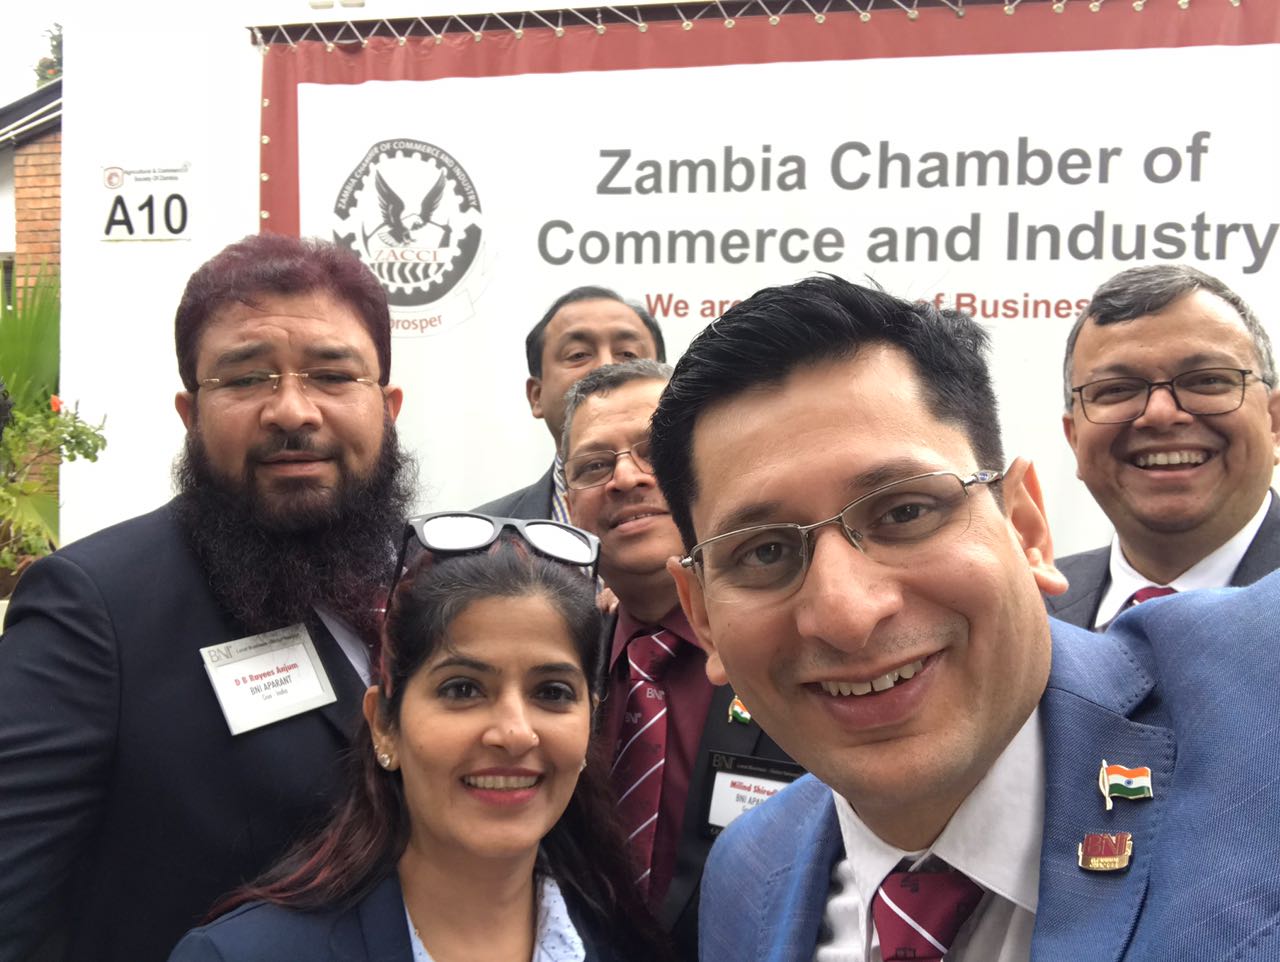 Zambia Chamber of Commerce and Industry meeting in  2018